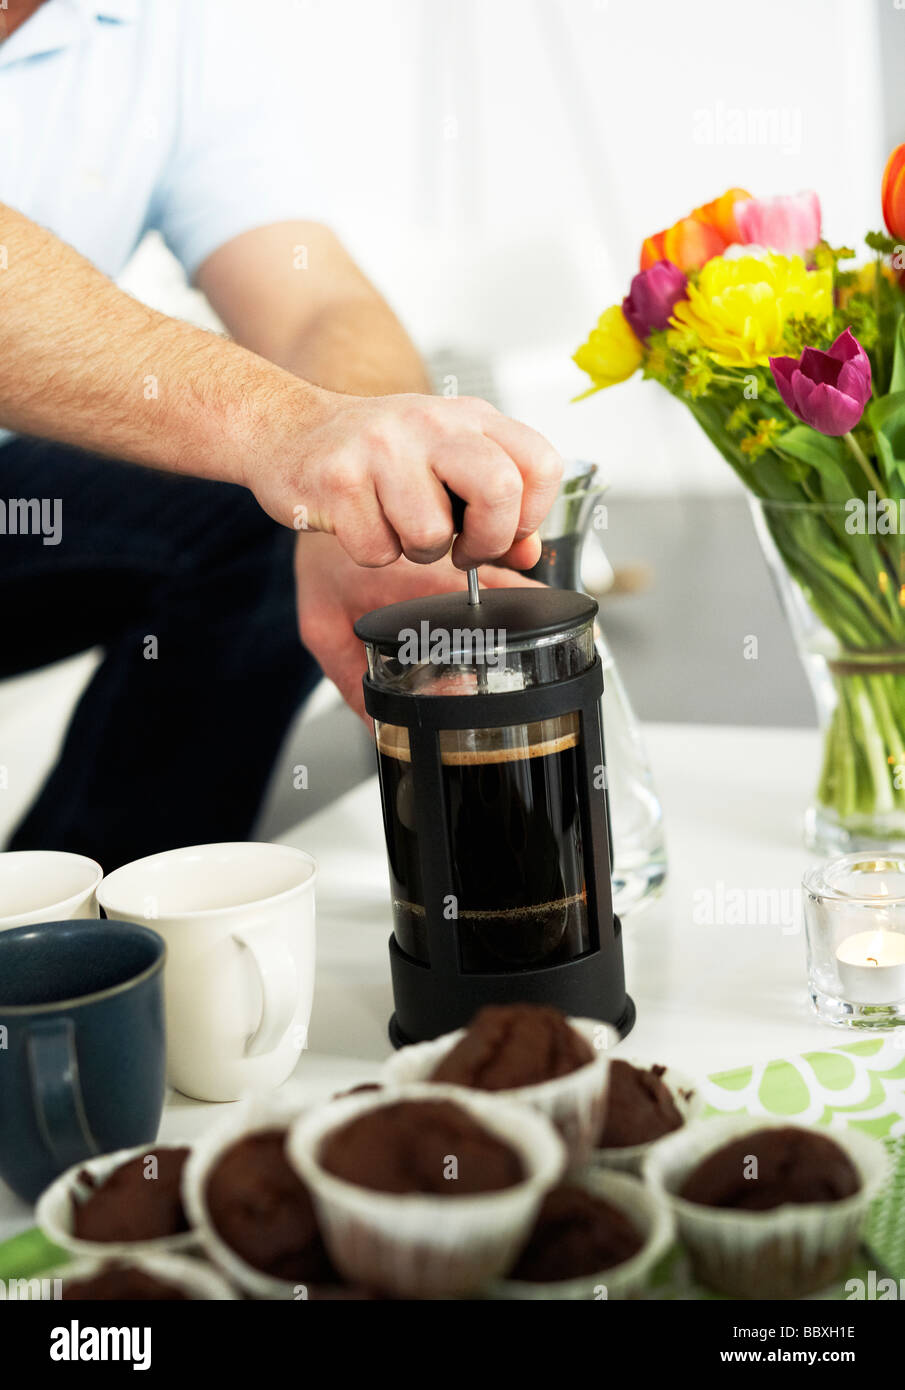 Coffee pot and queen cakes Sweden. Stock Photo